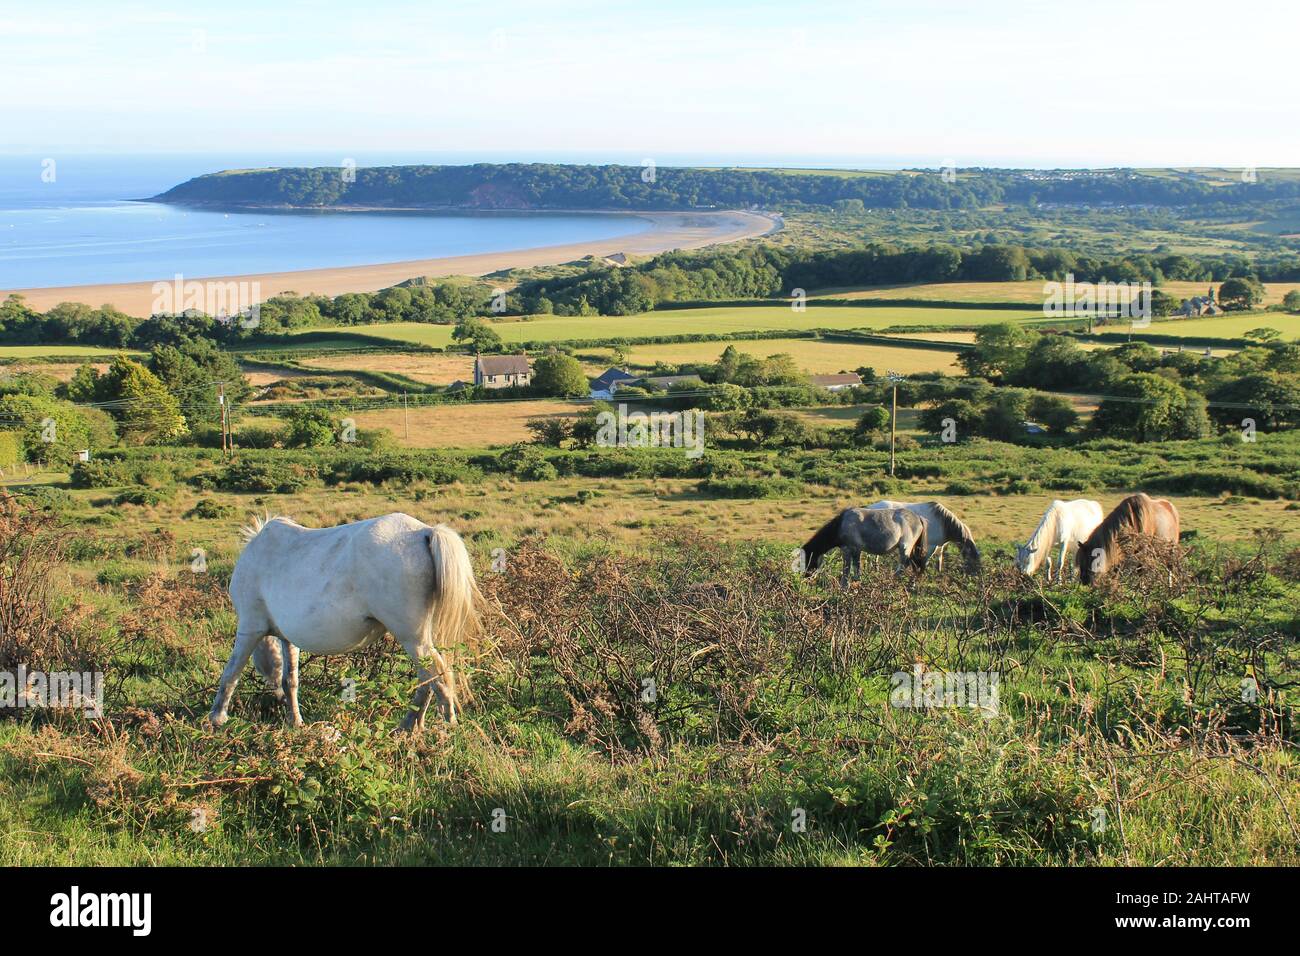 Oxwich Bay from the slopes of Cefn Bryn, Gower, South Wales, UK Stock Photo